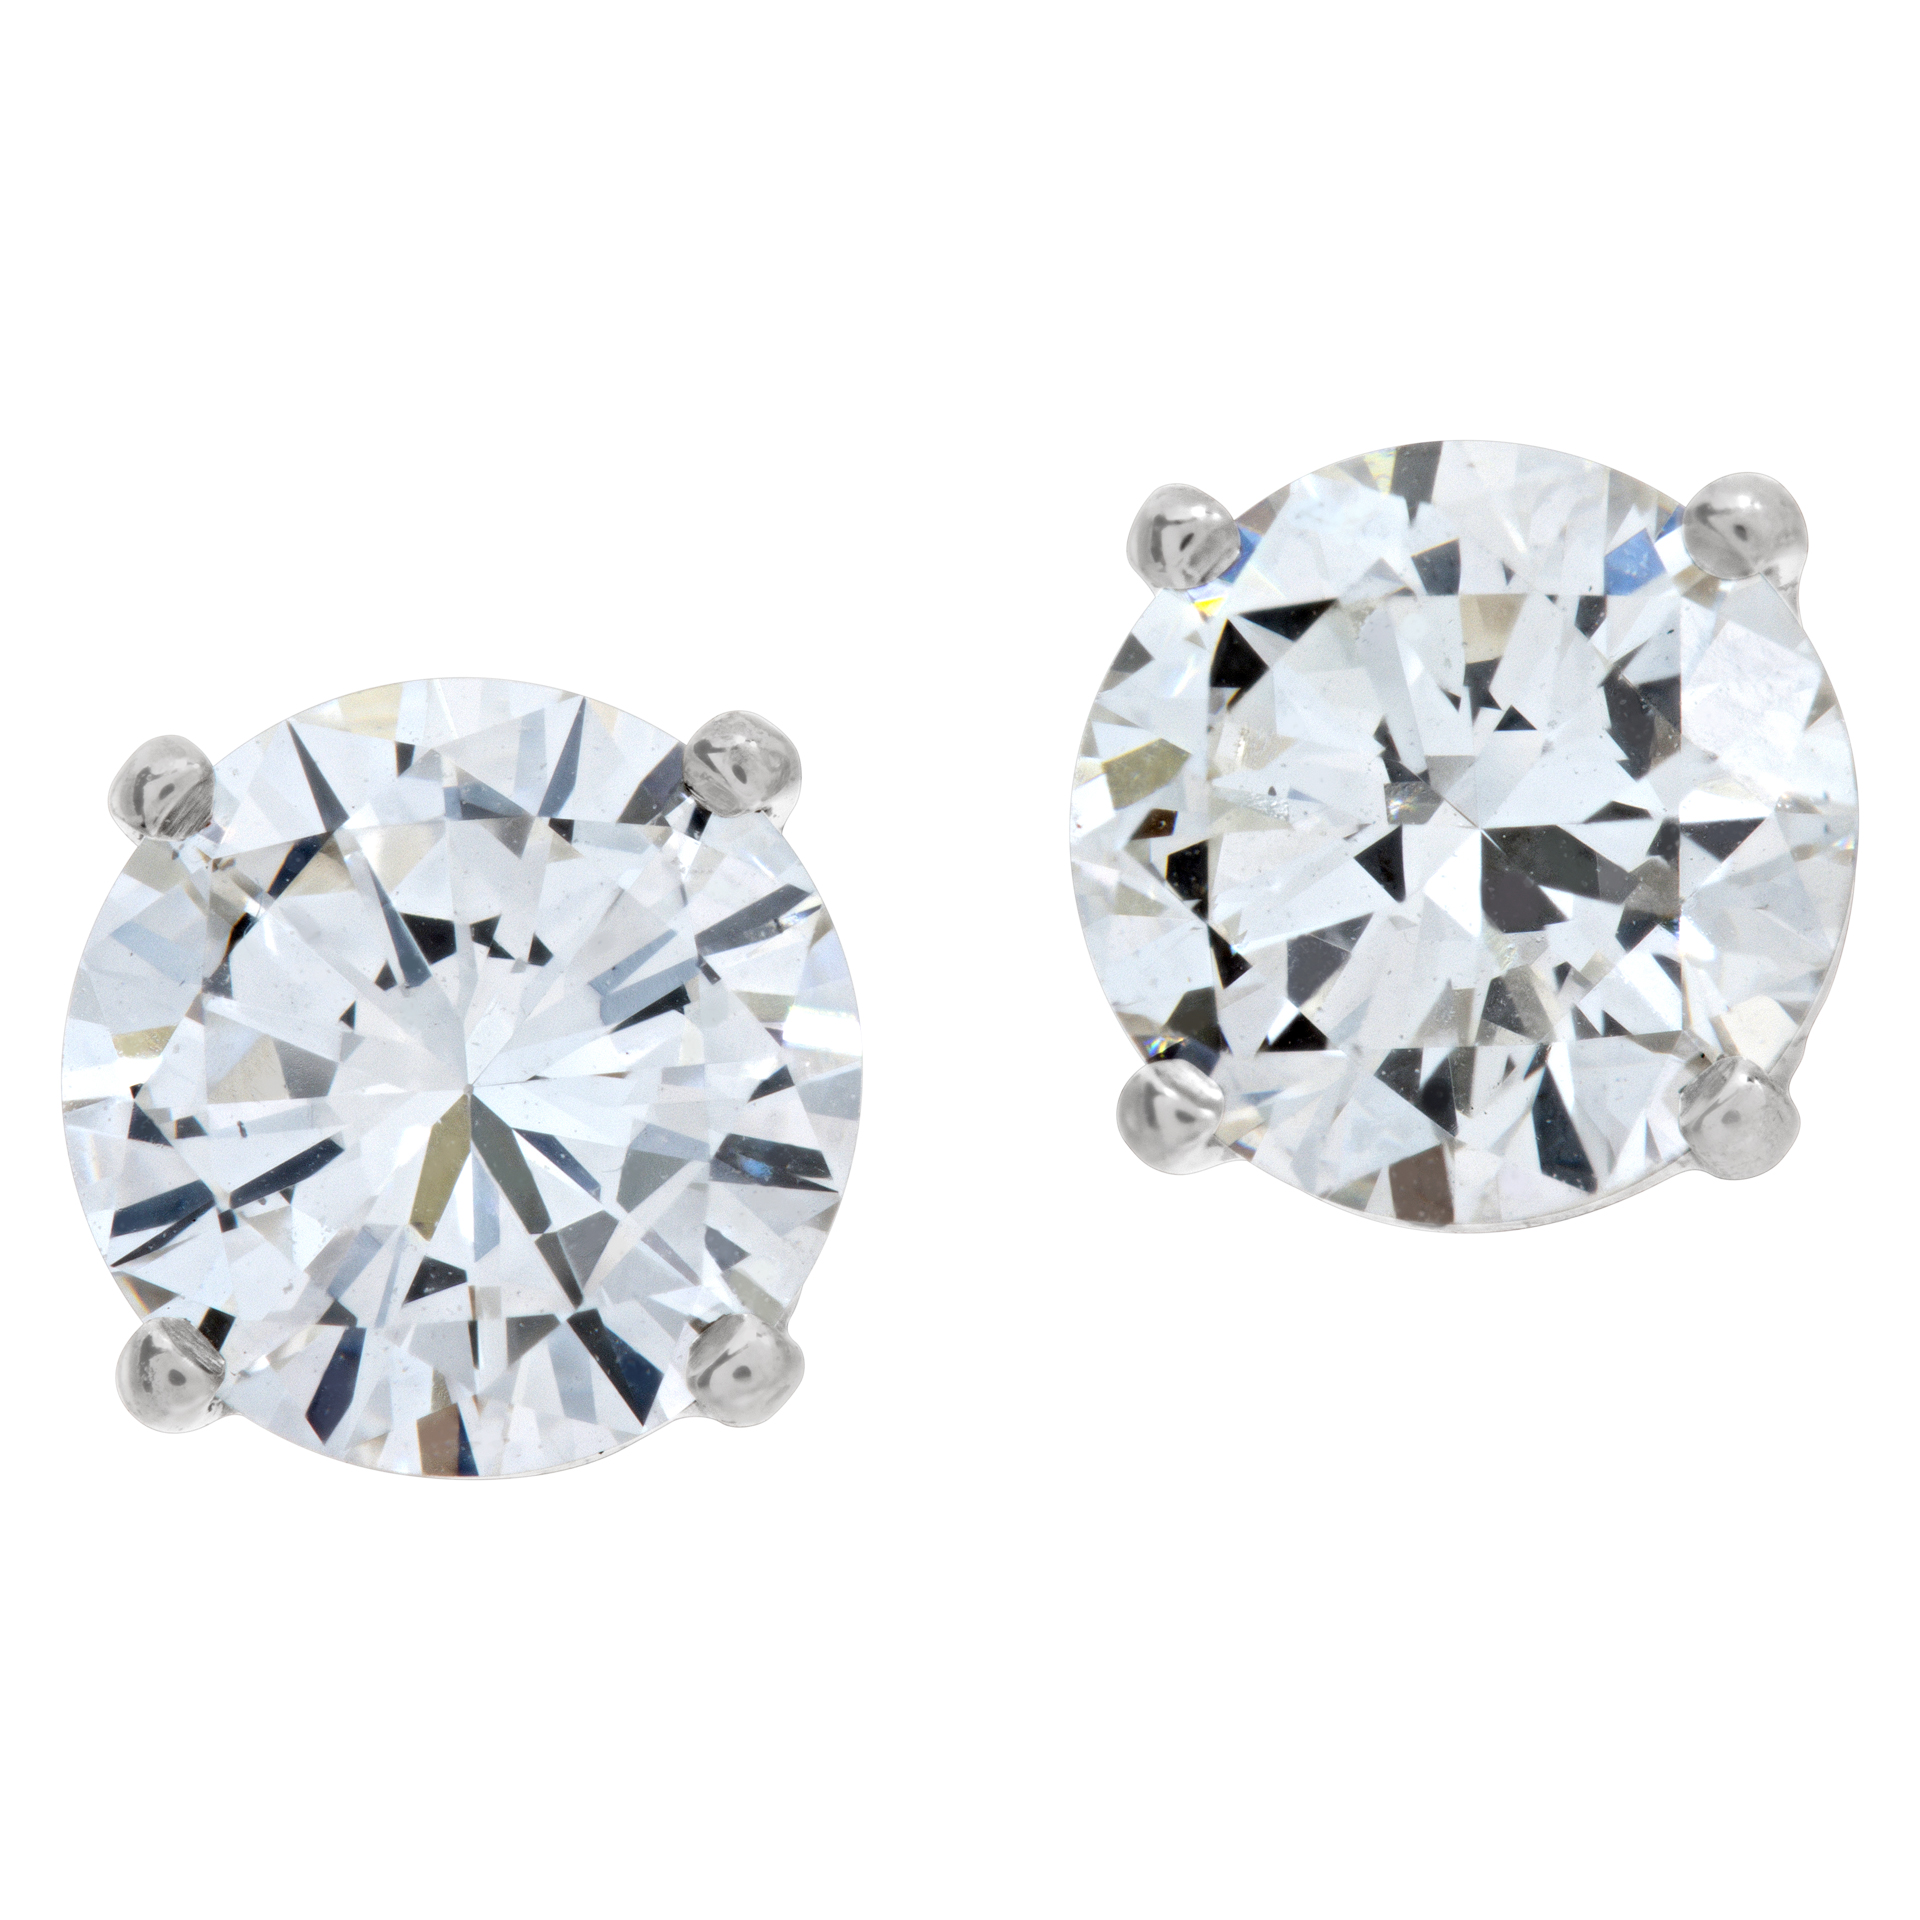 GIA certified round brilliand cut diamond studs 1.04 carat and 1.03 carat both G color, VVS2 clarity set in 18k white gold setting